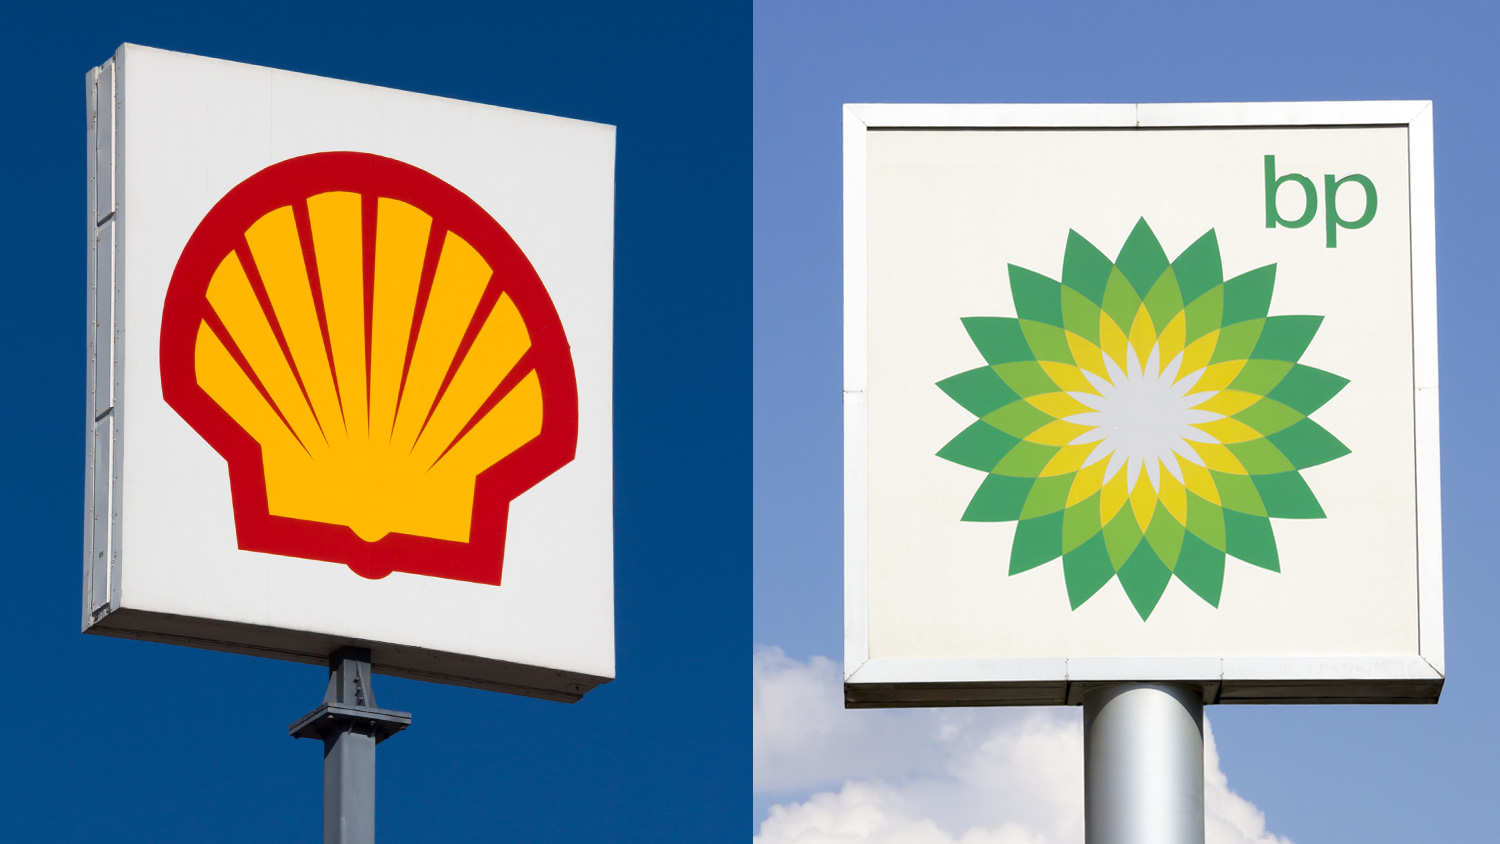 Shell and BP